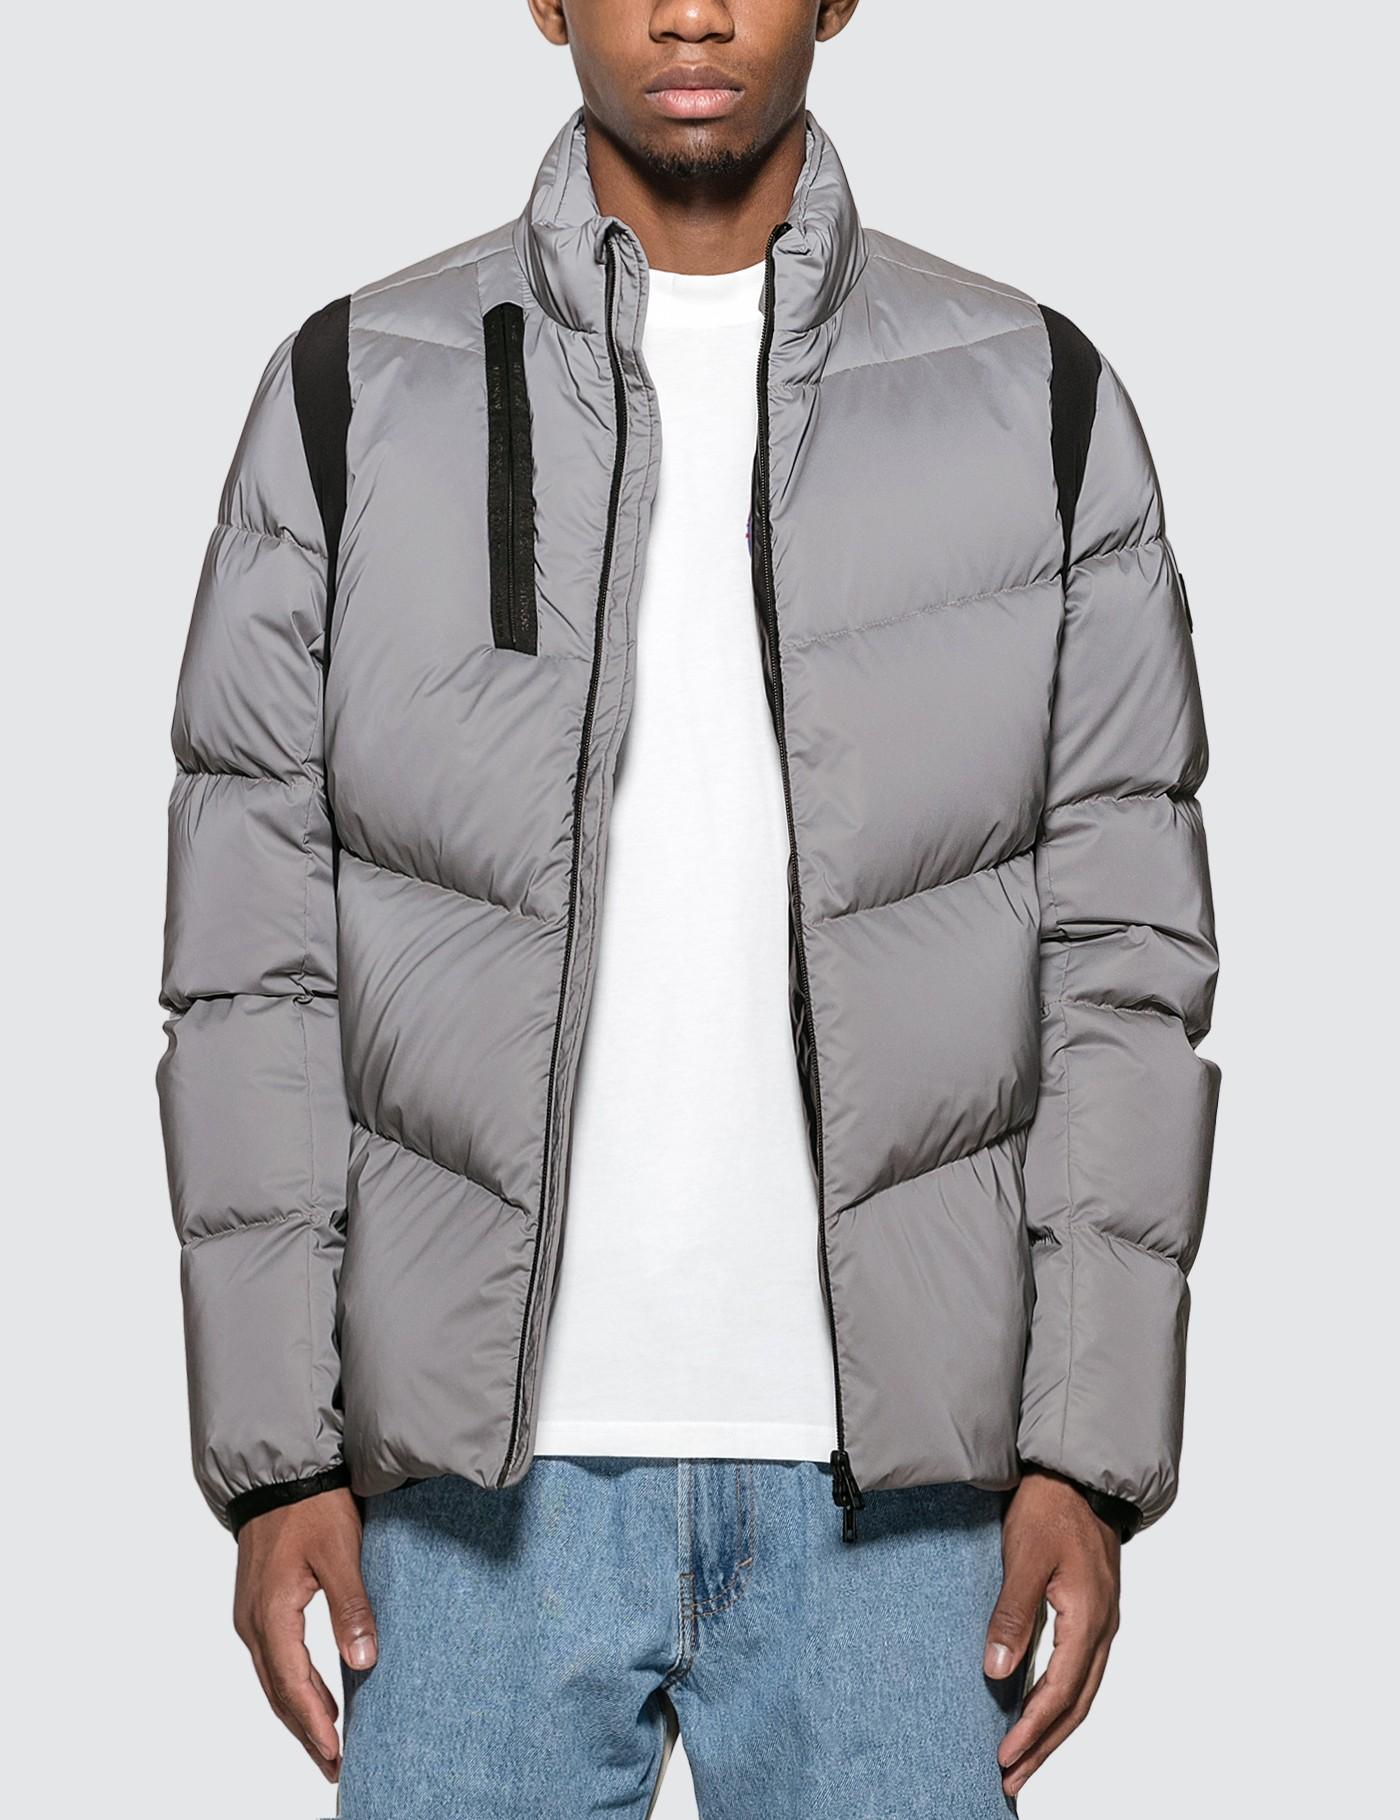 Moncler Reflective Store, 66% OFF | www.beachclub93.com